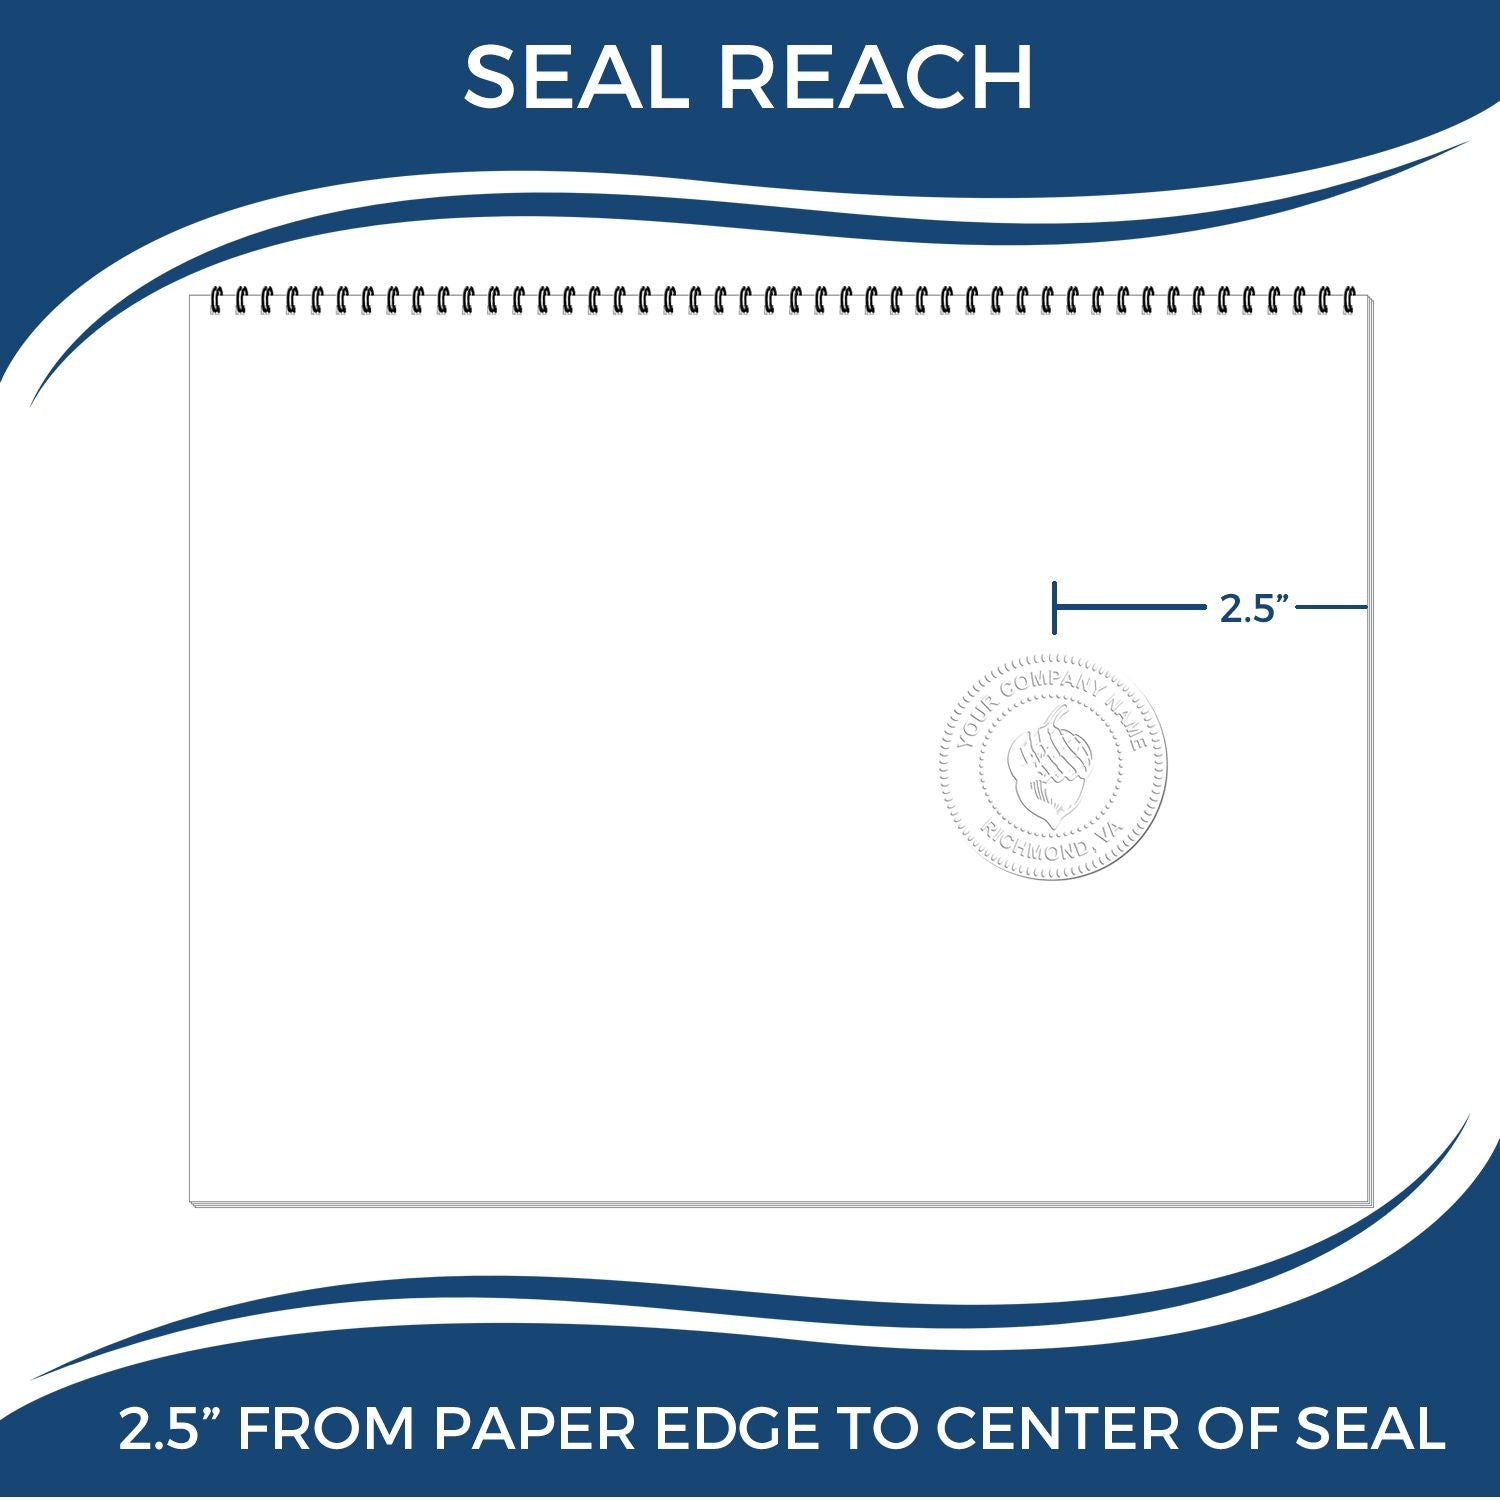 An infographic showing the seal reach which is represented by a ruler and a miniature seal image of the Long Reach Guam Land Surveyor Seal